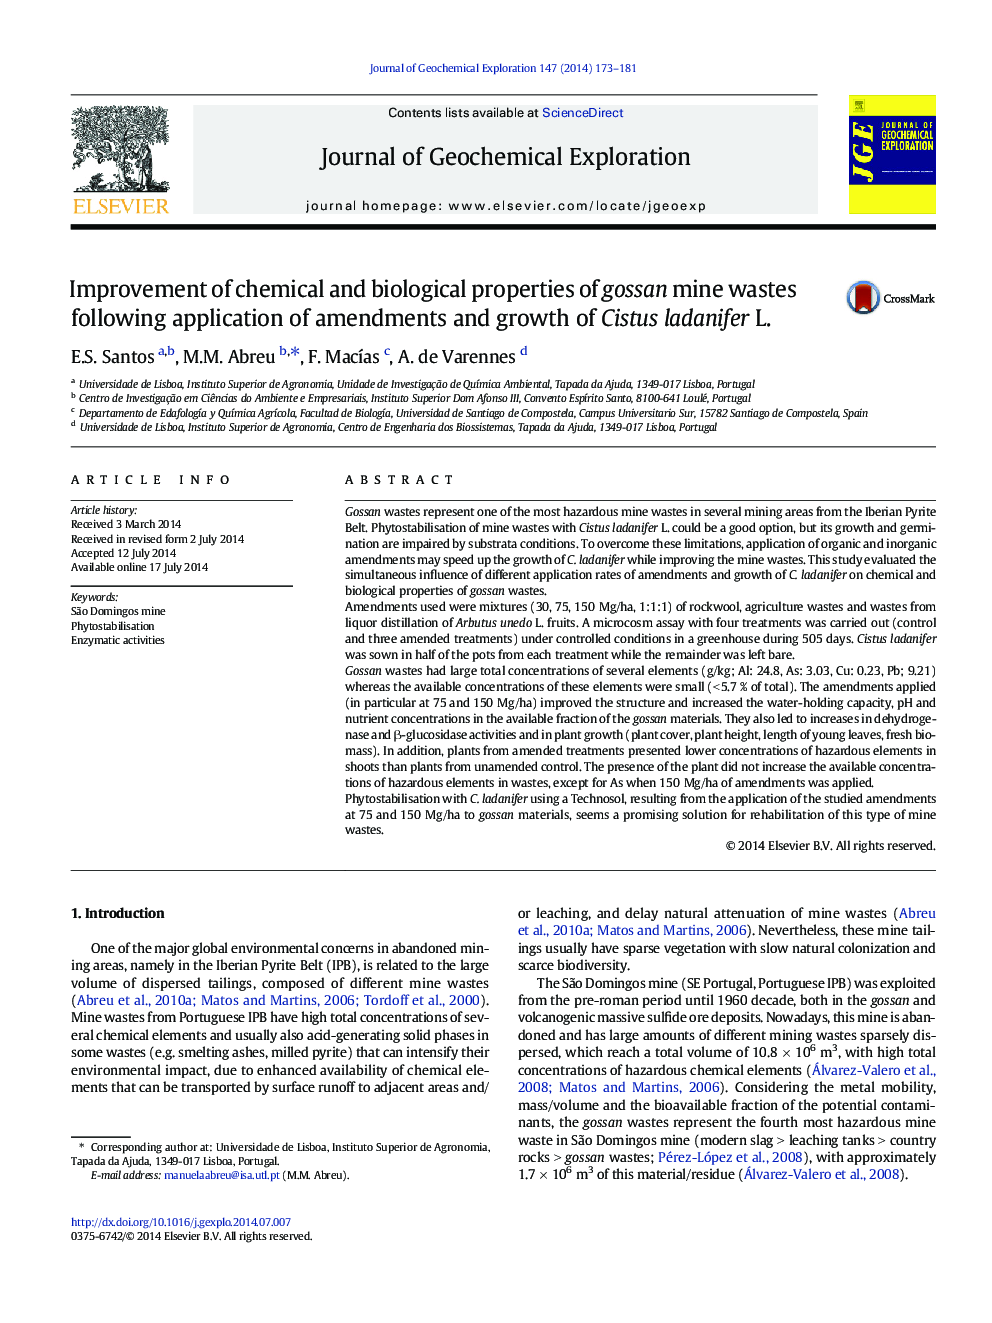 Improvement of chemical and biological properties of gossan mine wastes following application of amendments and growth of Cistus ladanifer L.